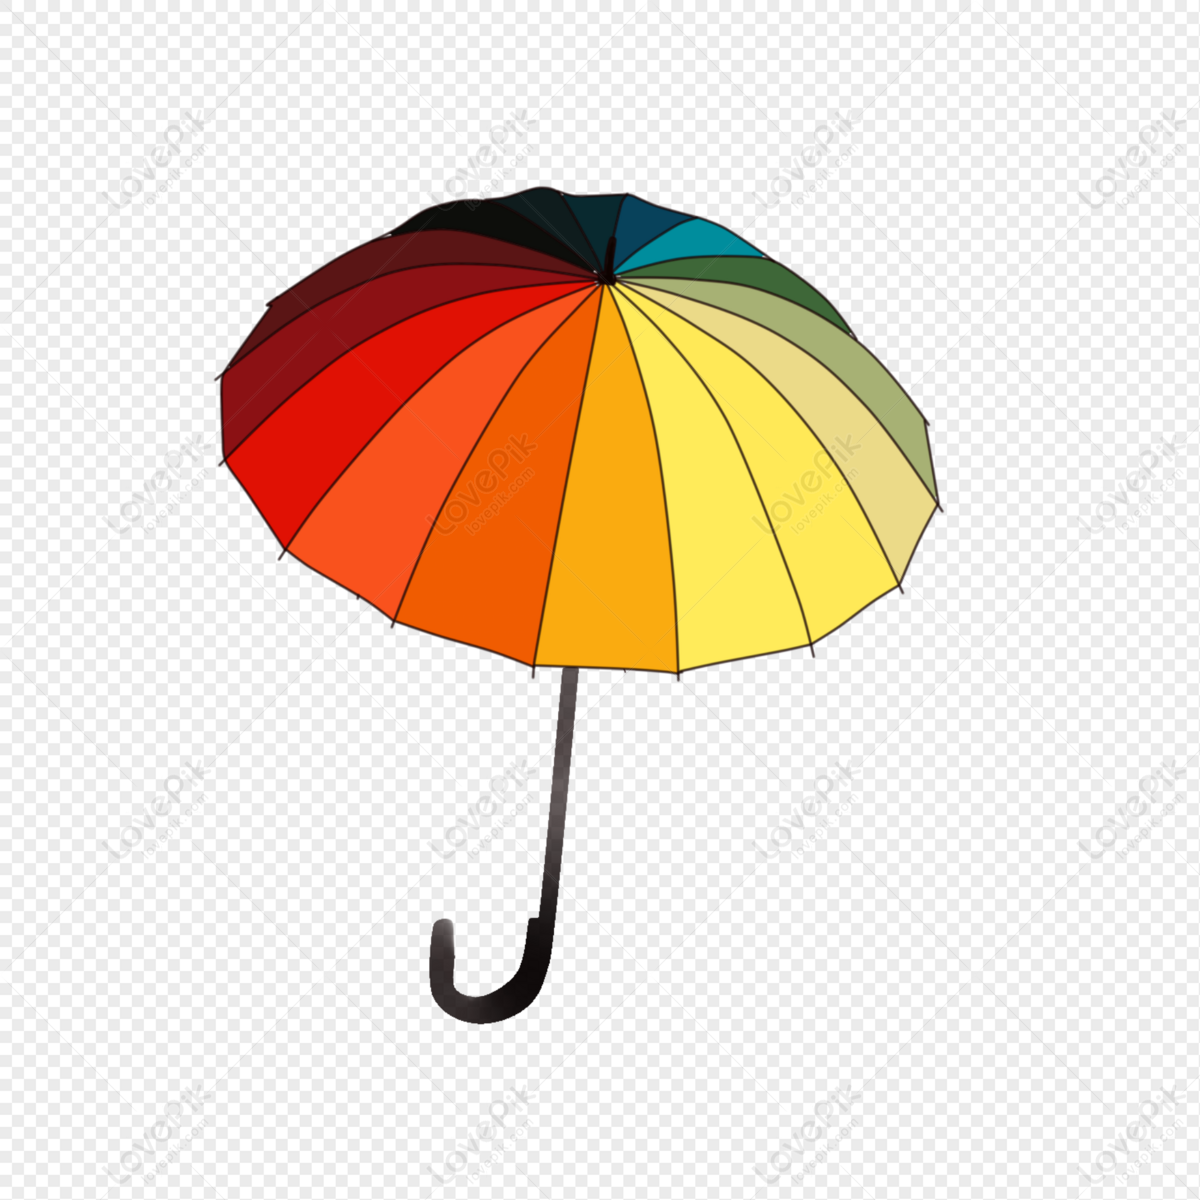 Umbrella PNG Image And Clipart Image For Free Download - Lovepik | 401070808